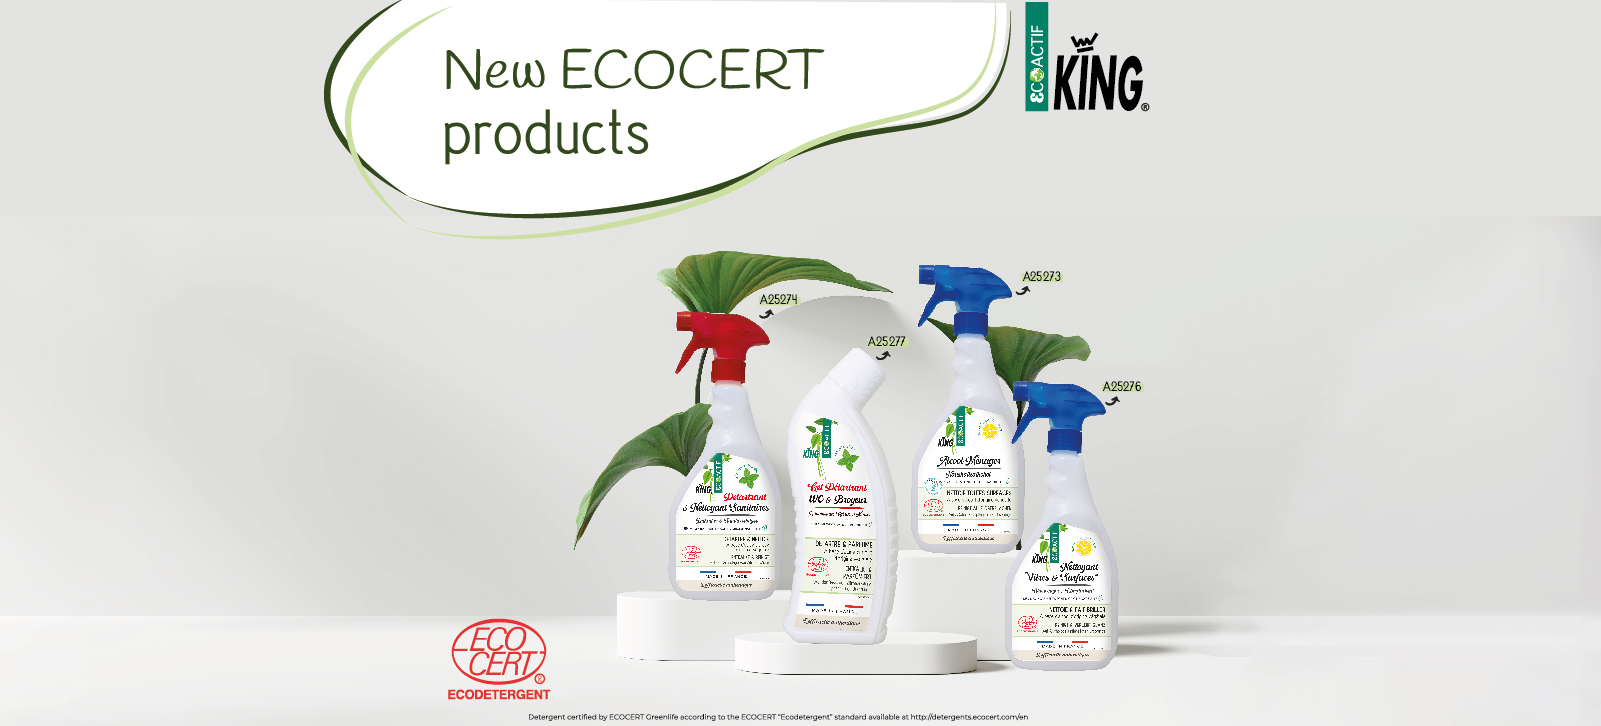 4 new ECOCERT products